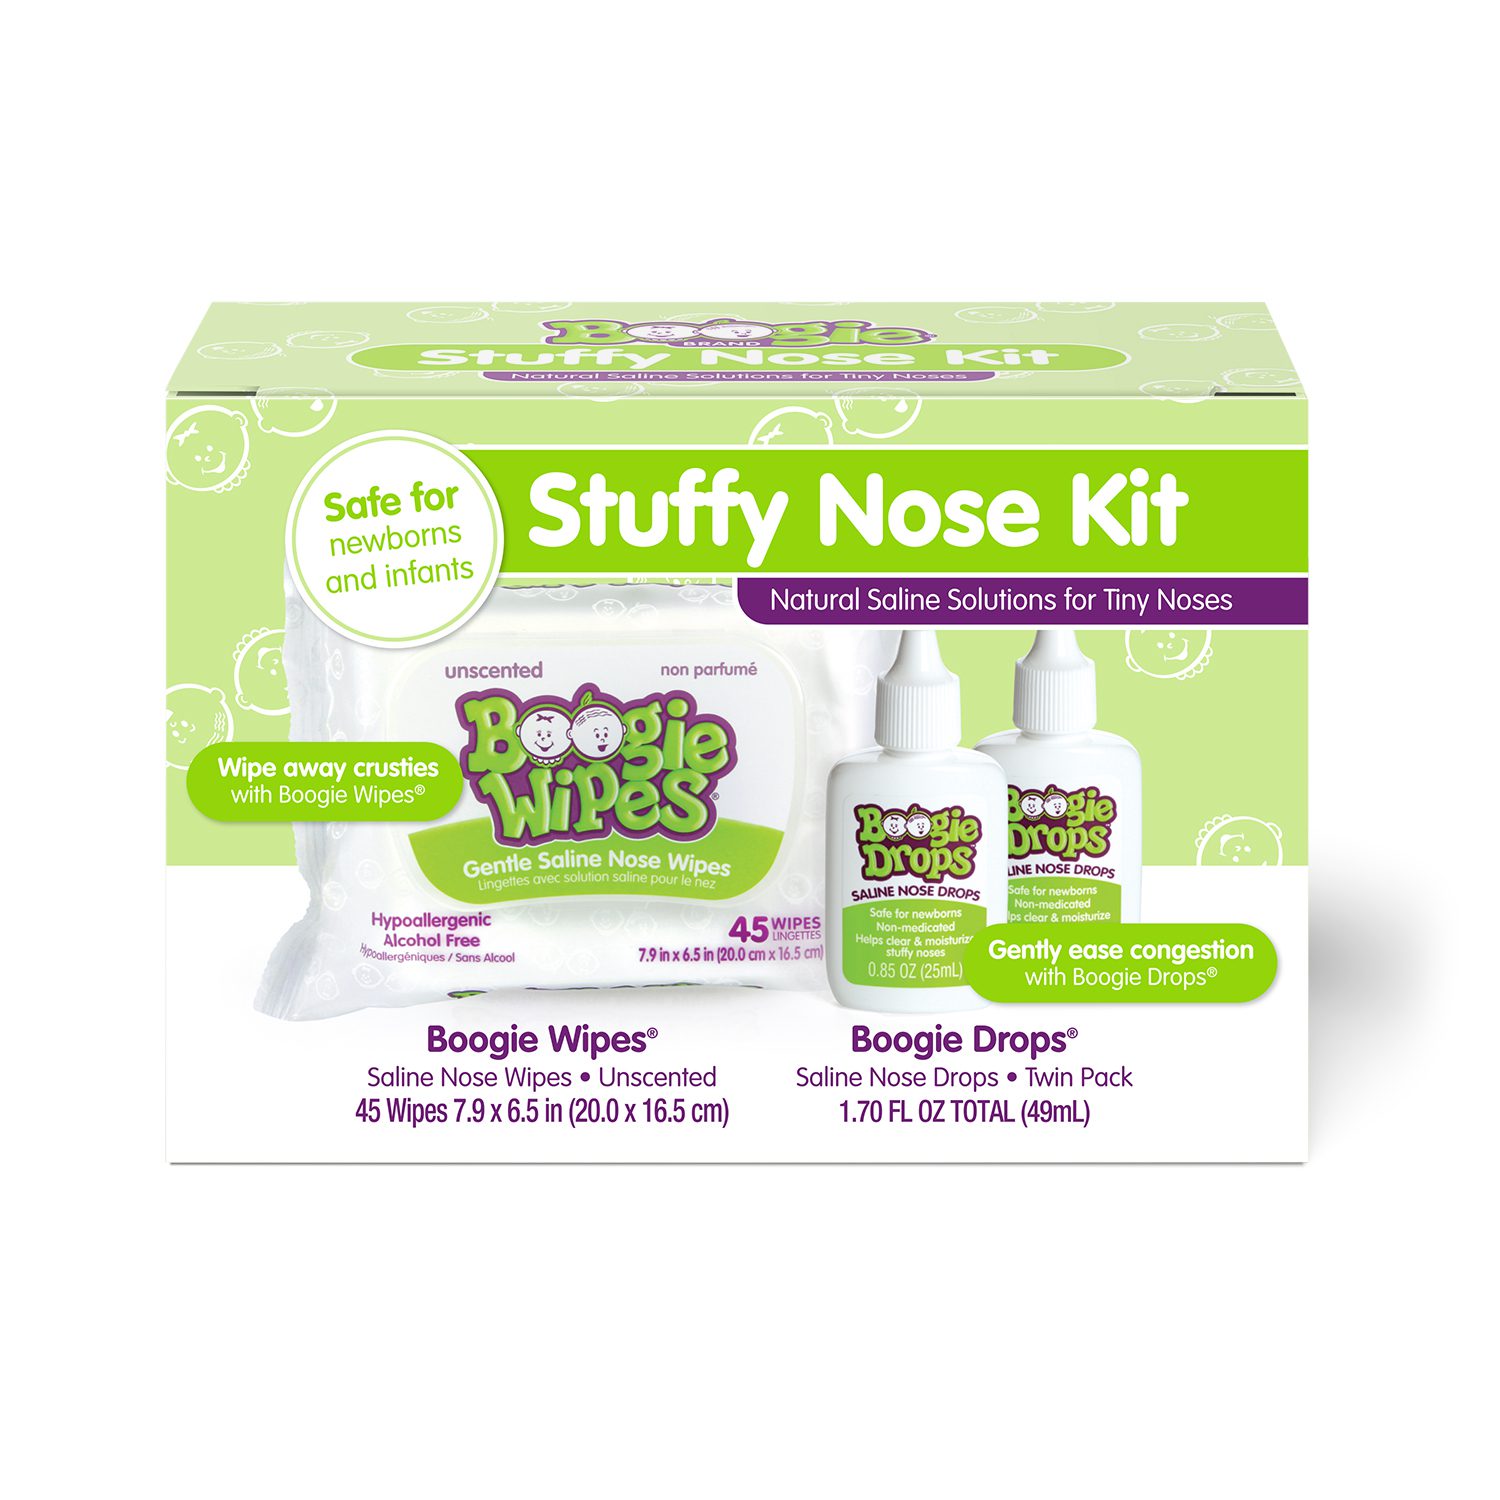 The ultimate solution to clear snotty noses is here 